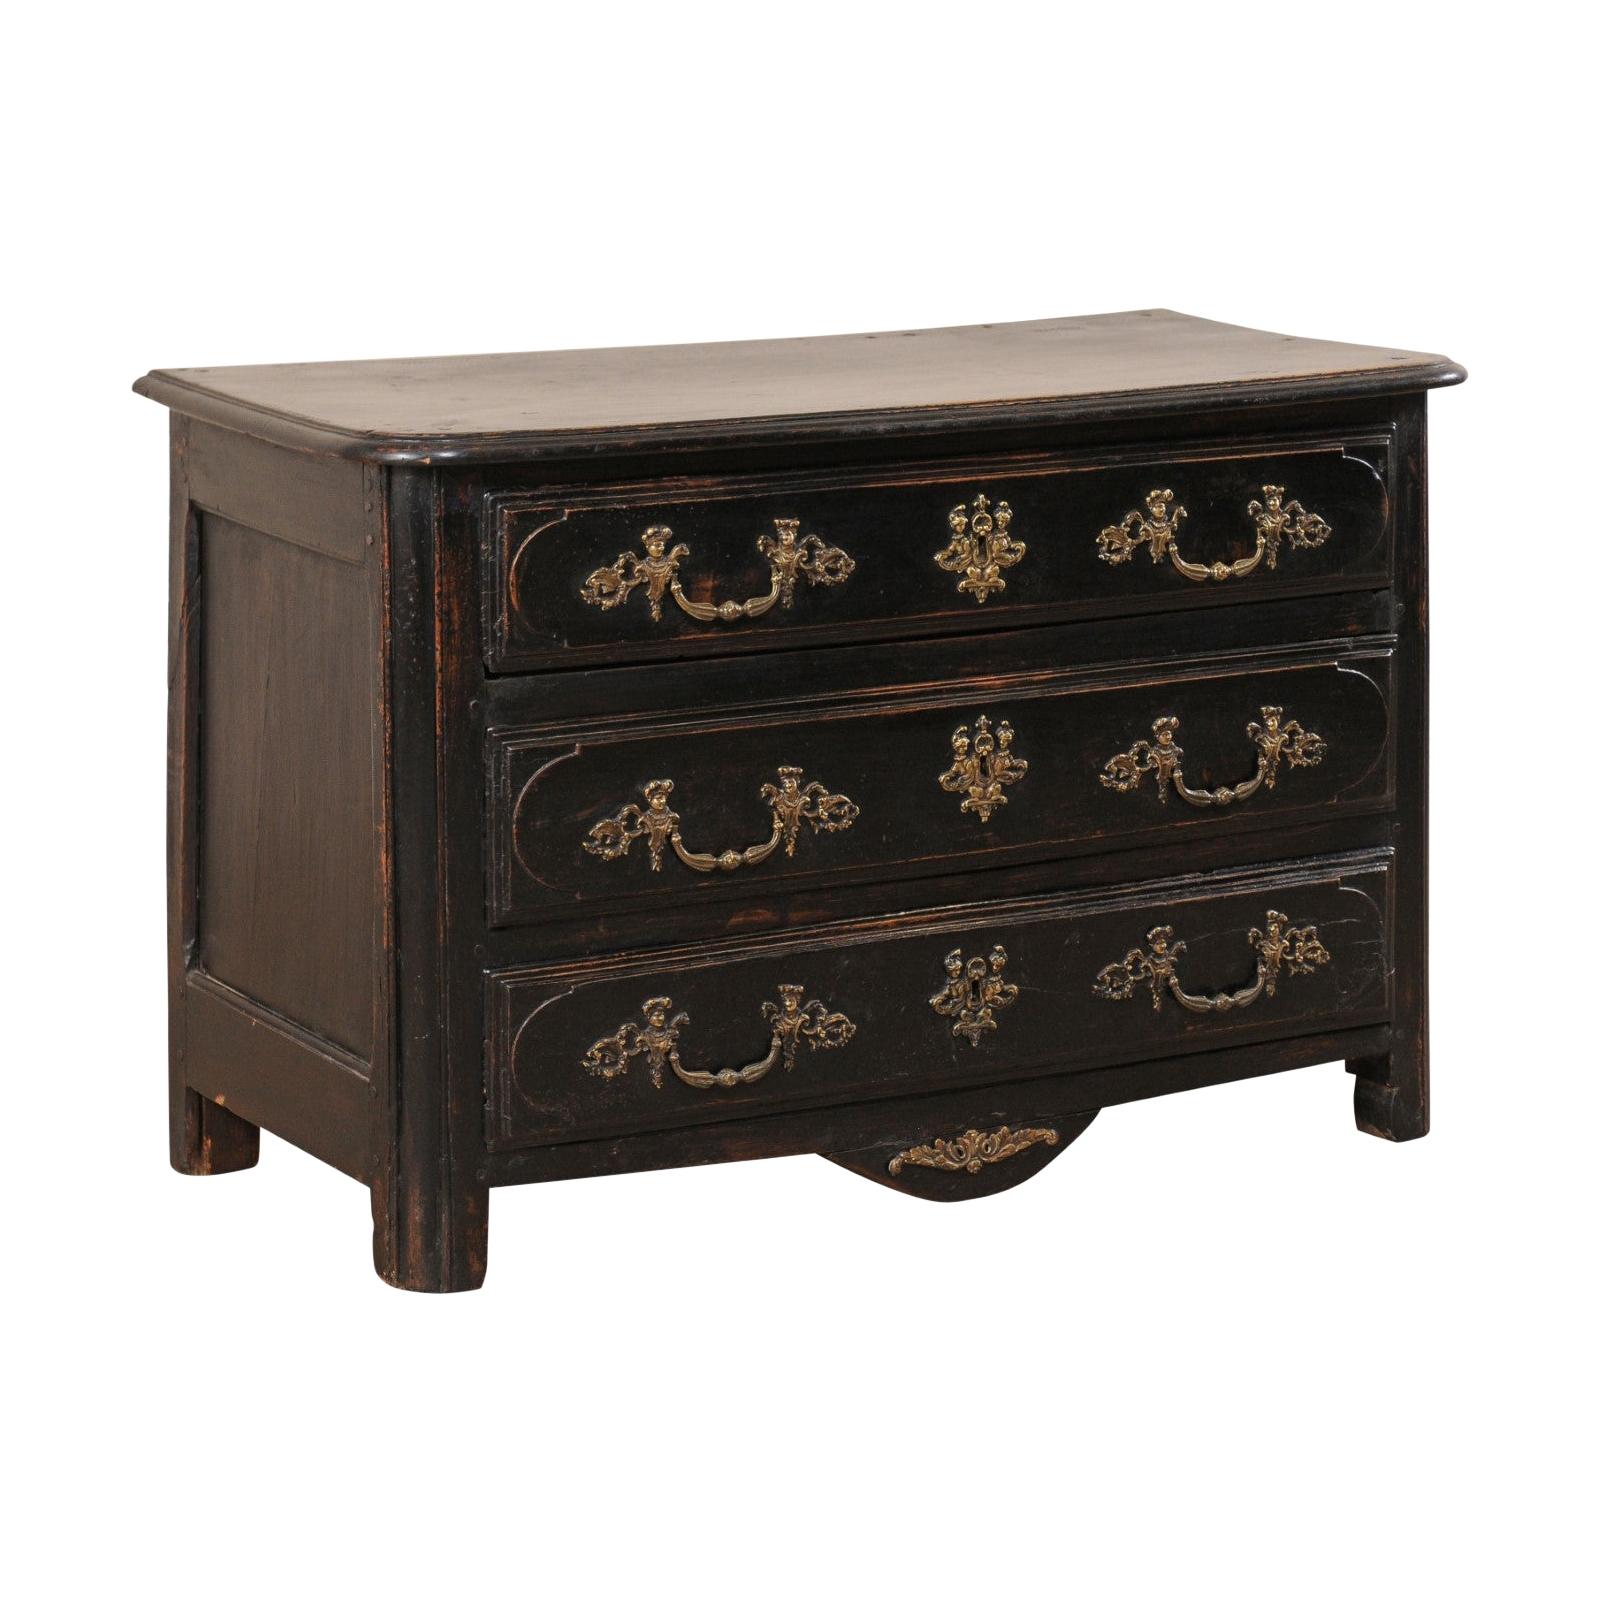 Handsome 18th Century French Three-Drawer Wood Chest